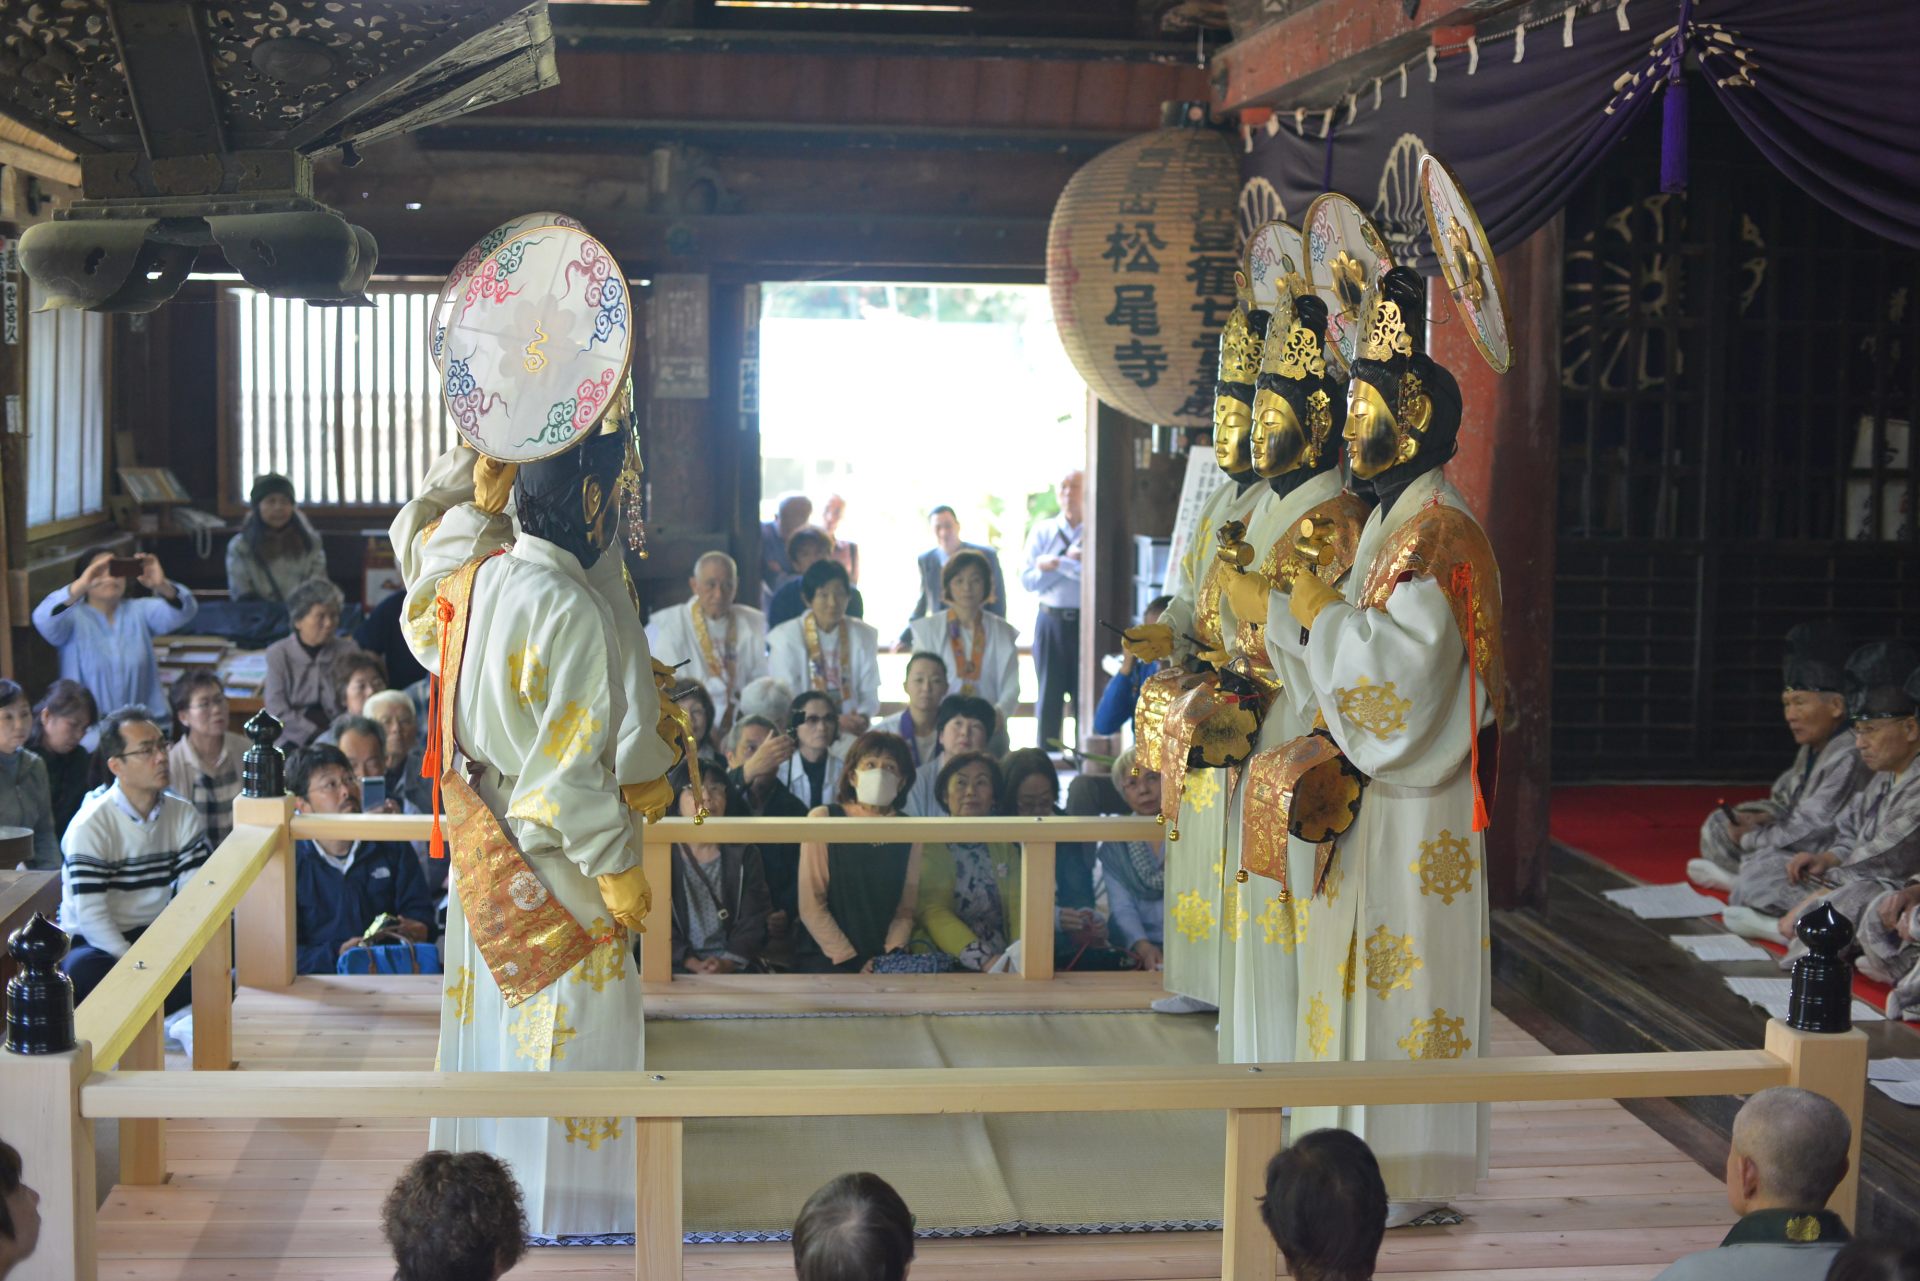 The Hotokemai consists of the Buddha performers first facing the center while dancing, then facing outwards while dancing, and then going around the stage while changing positions.